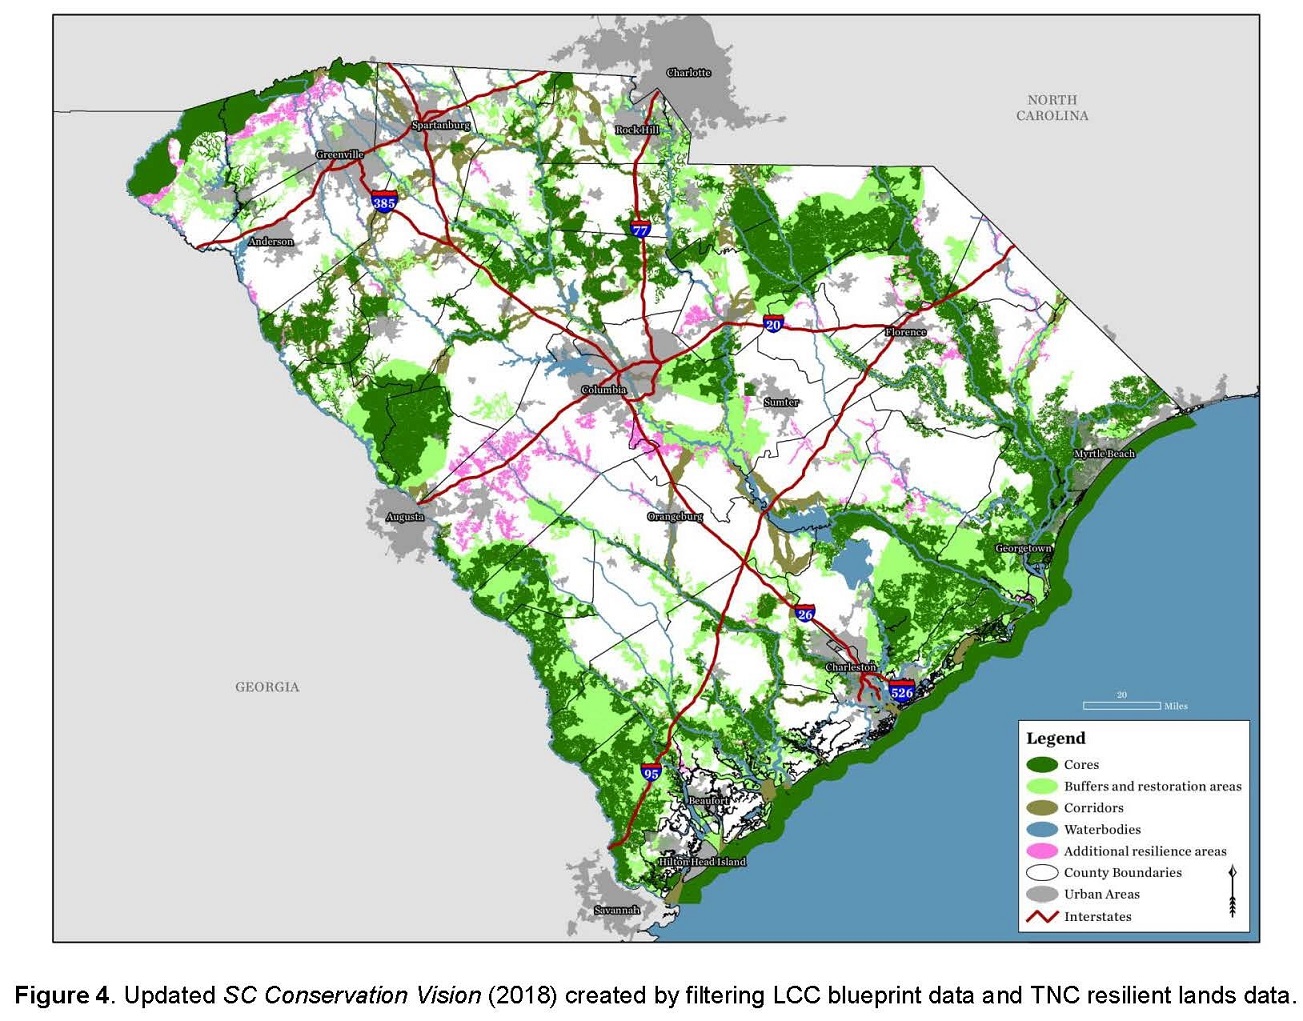 Map of the updated SC Conservation Vision, showing cores in dark green, buffers and restoration areas in light green, corridors in olive green, waterbodies in blue, additional resilience areas in pink, county boundaries in a black outline, urban areas in gray, and interstates as red lines. The caption on the image itself says 'Figure 4. Updated SC Conservation Vision (2018) created by filtering LCC blueprint data and TNC resilient lands data.'